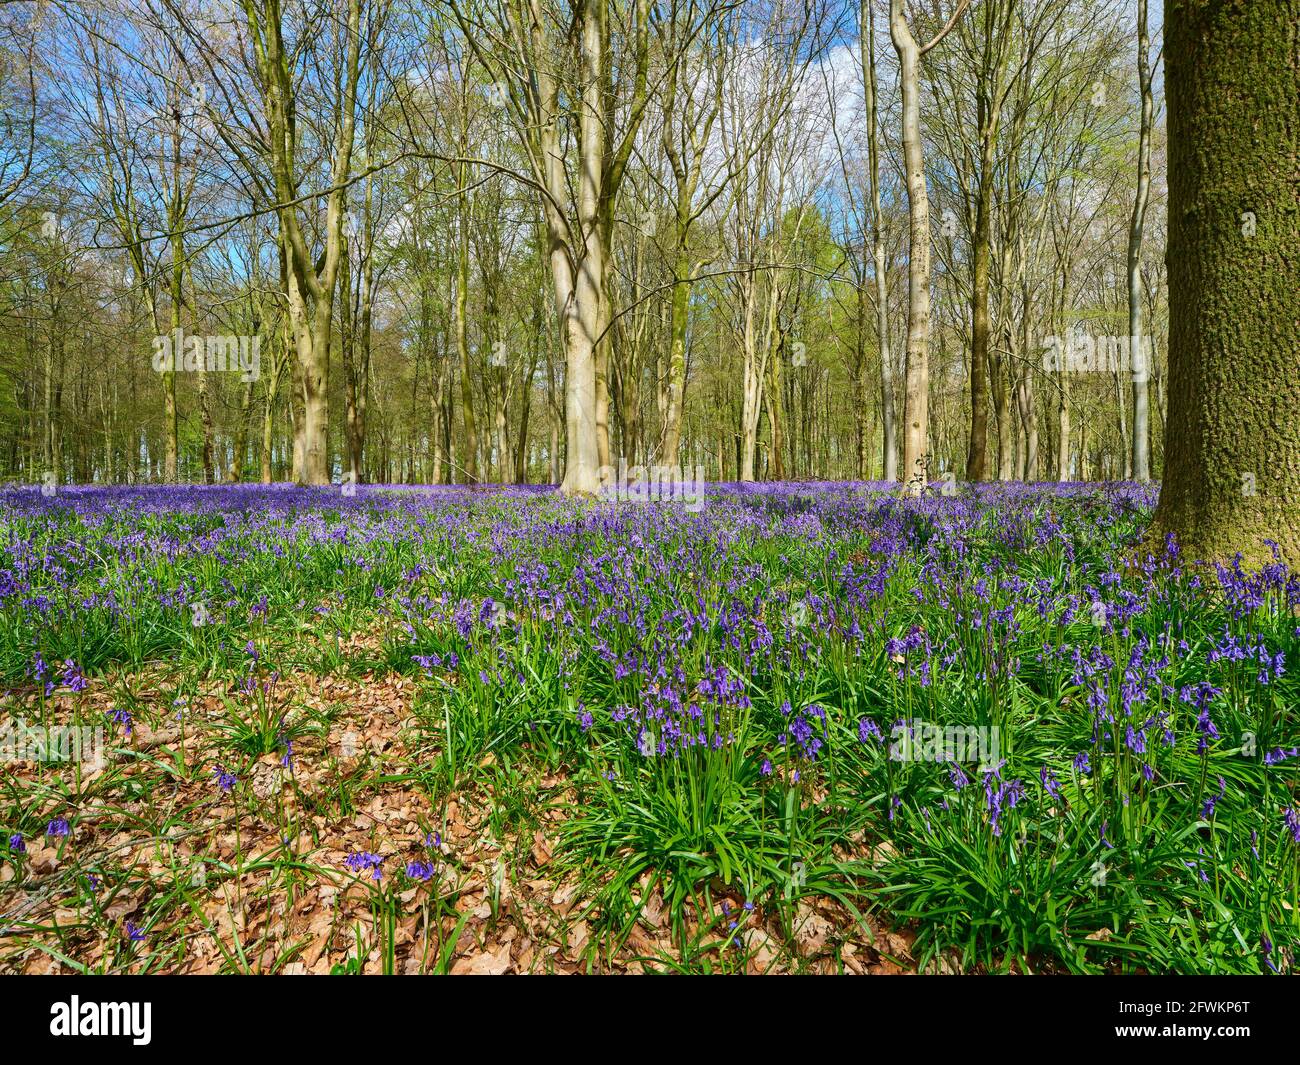 A carpet of Bluebells (Hyacinthoides non-scripta) covering a woodland floor in the with large trees in the background, England, UK Stock Photo